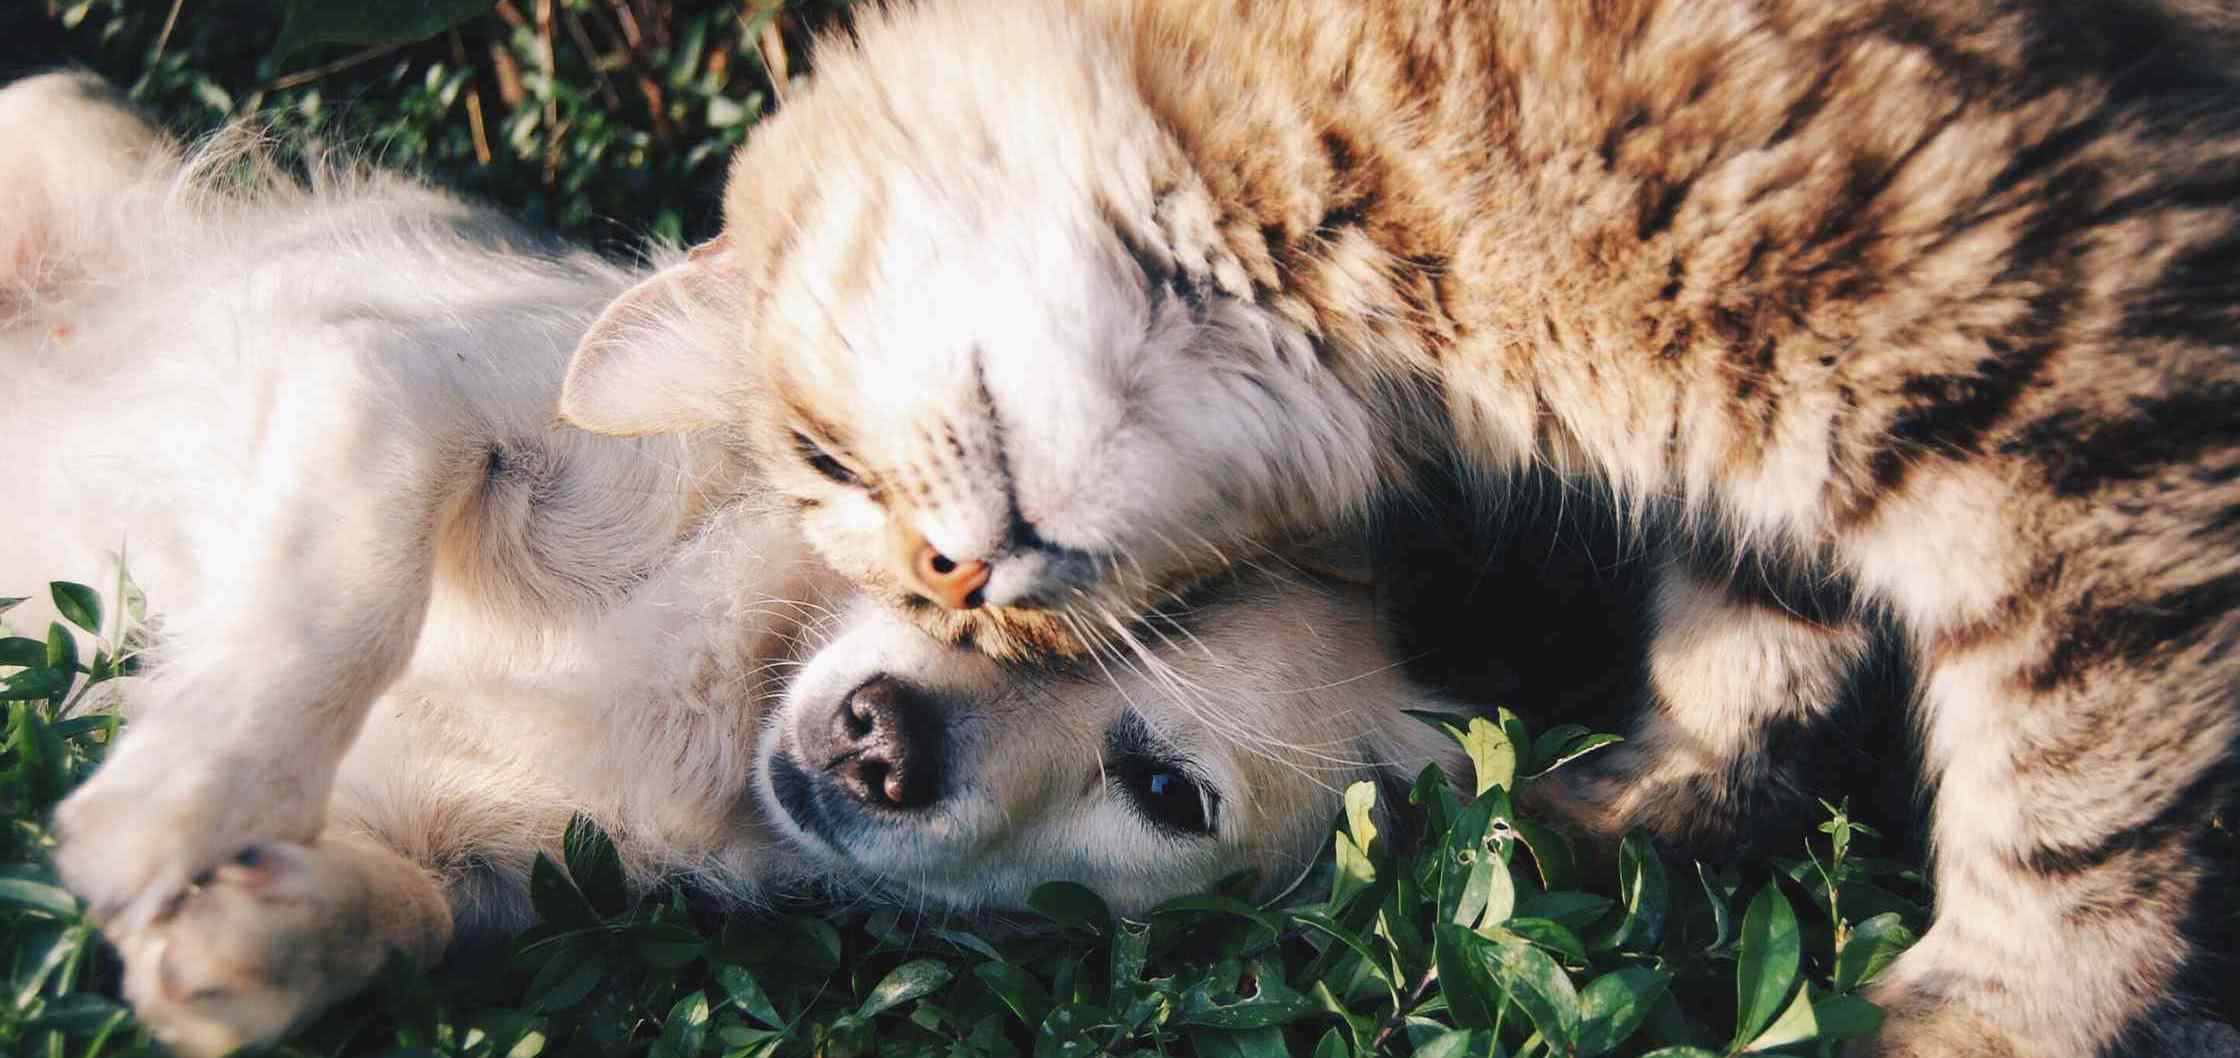 The Link Between Pet Anxiety and Immune System